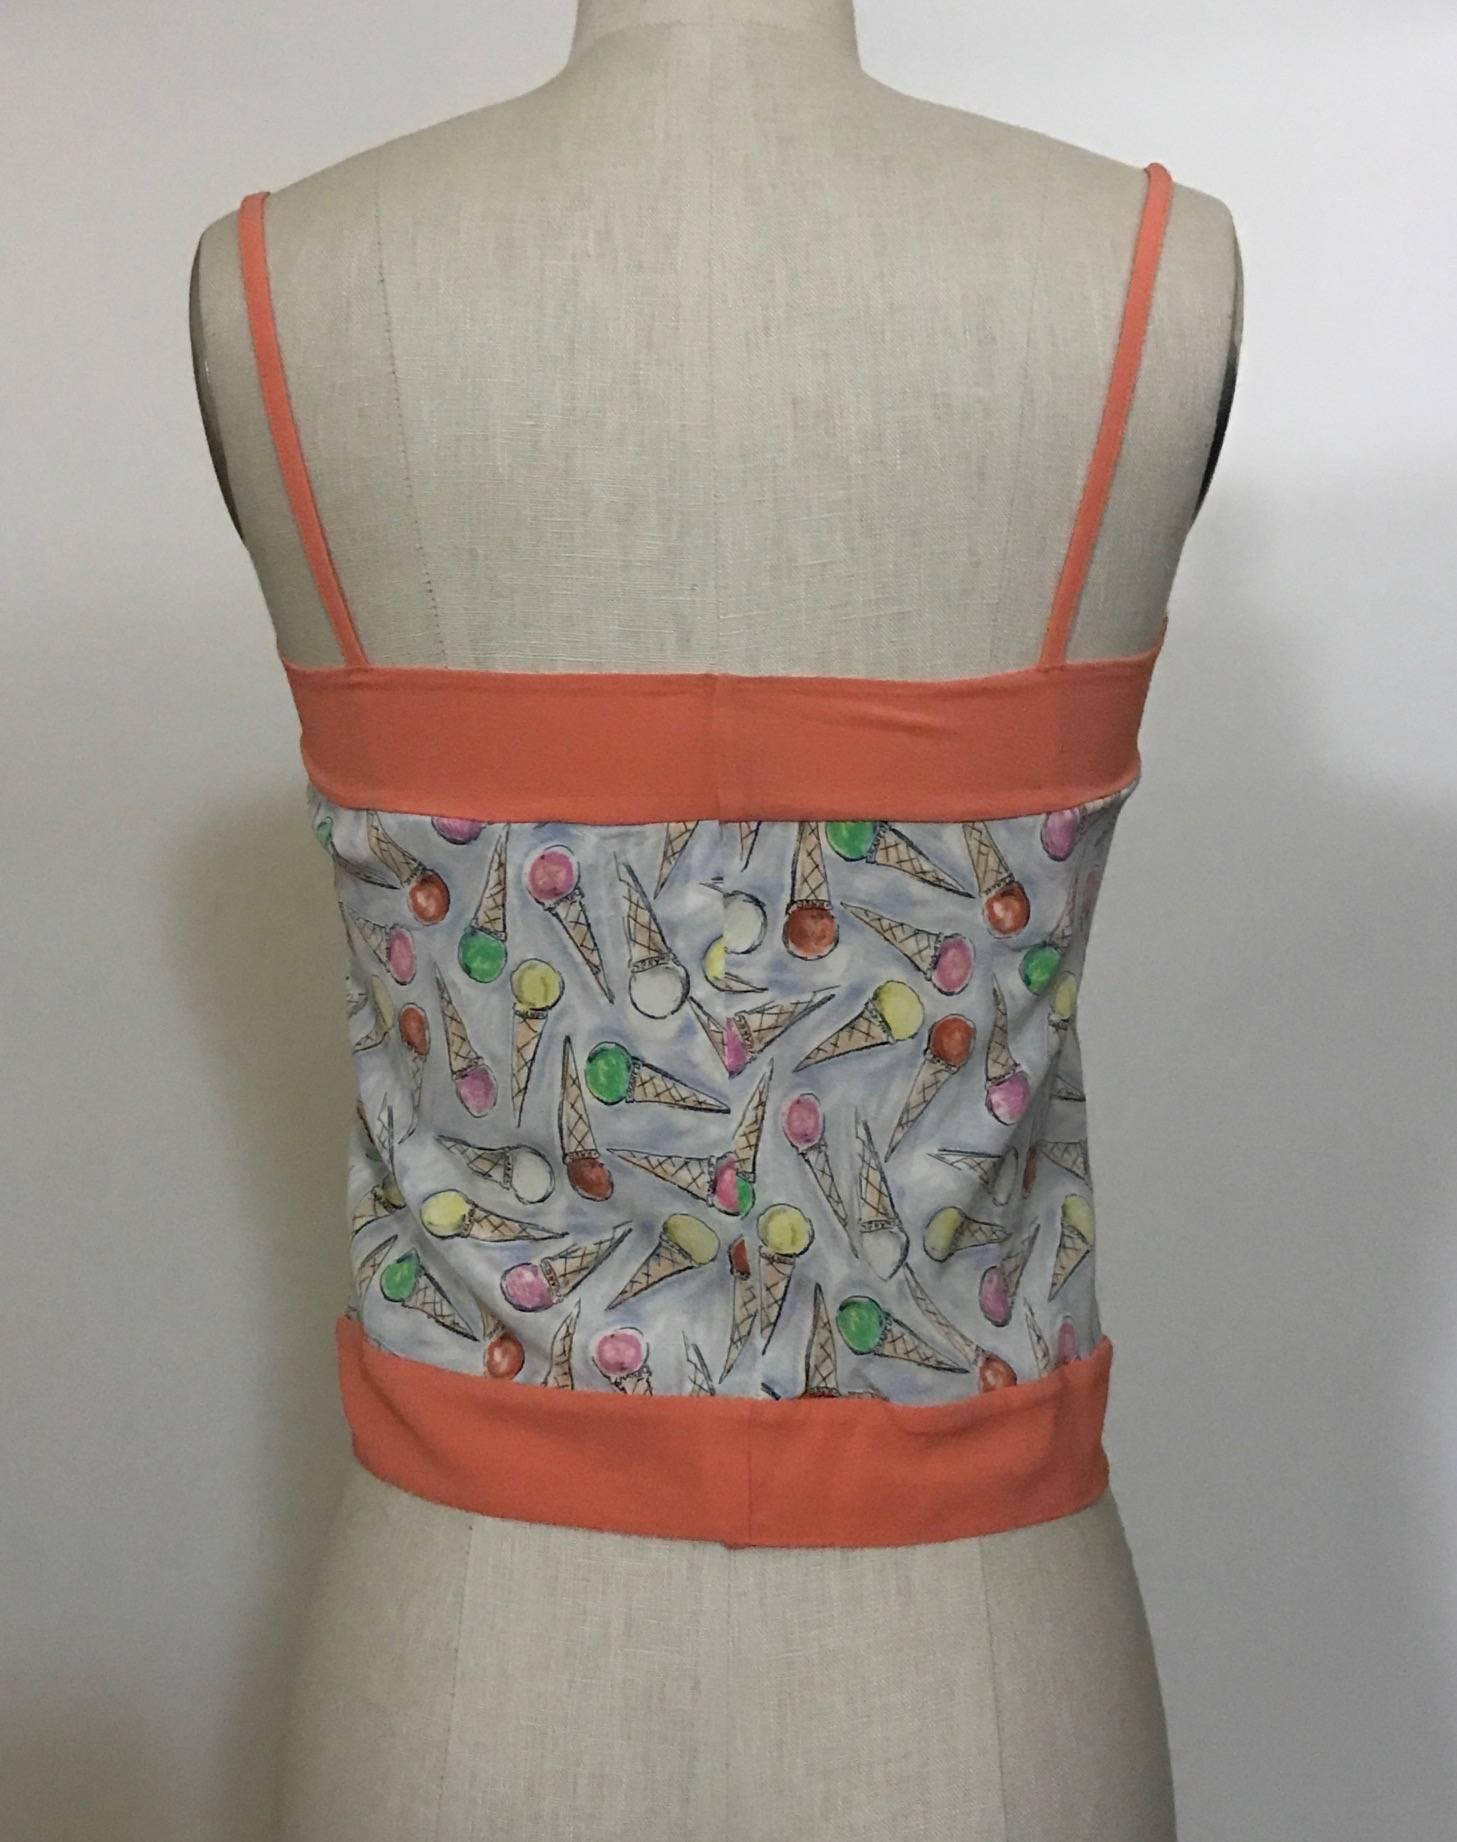 Chanel pale blue-grey slightly cropped top with multi-color ice cream cone print and salmon pink trim from Karl Lagerfeld's 2004 Chanel Cruise collection. 

93% silk, 7% spandex.
Trim 92% silk, 8% spandex.

Made in Italy.

Labelled size FR 36, US 4,